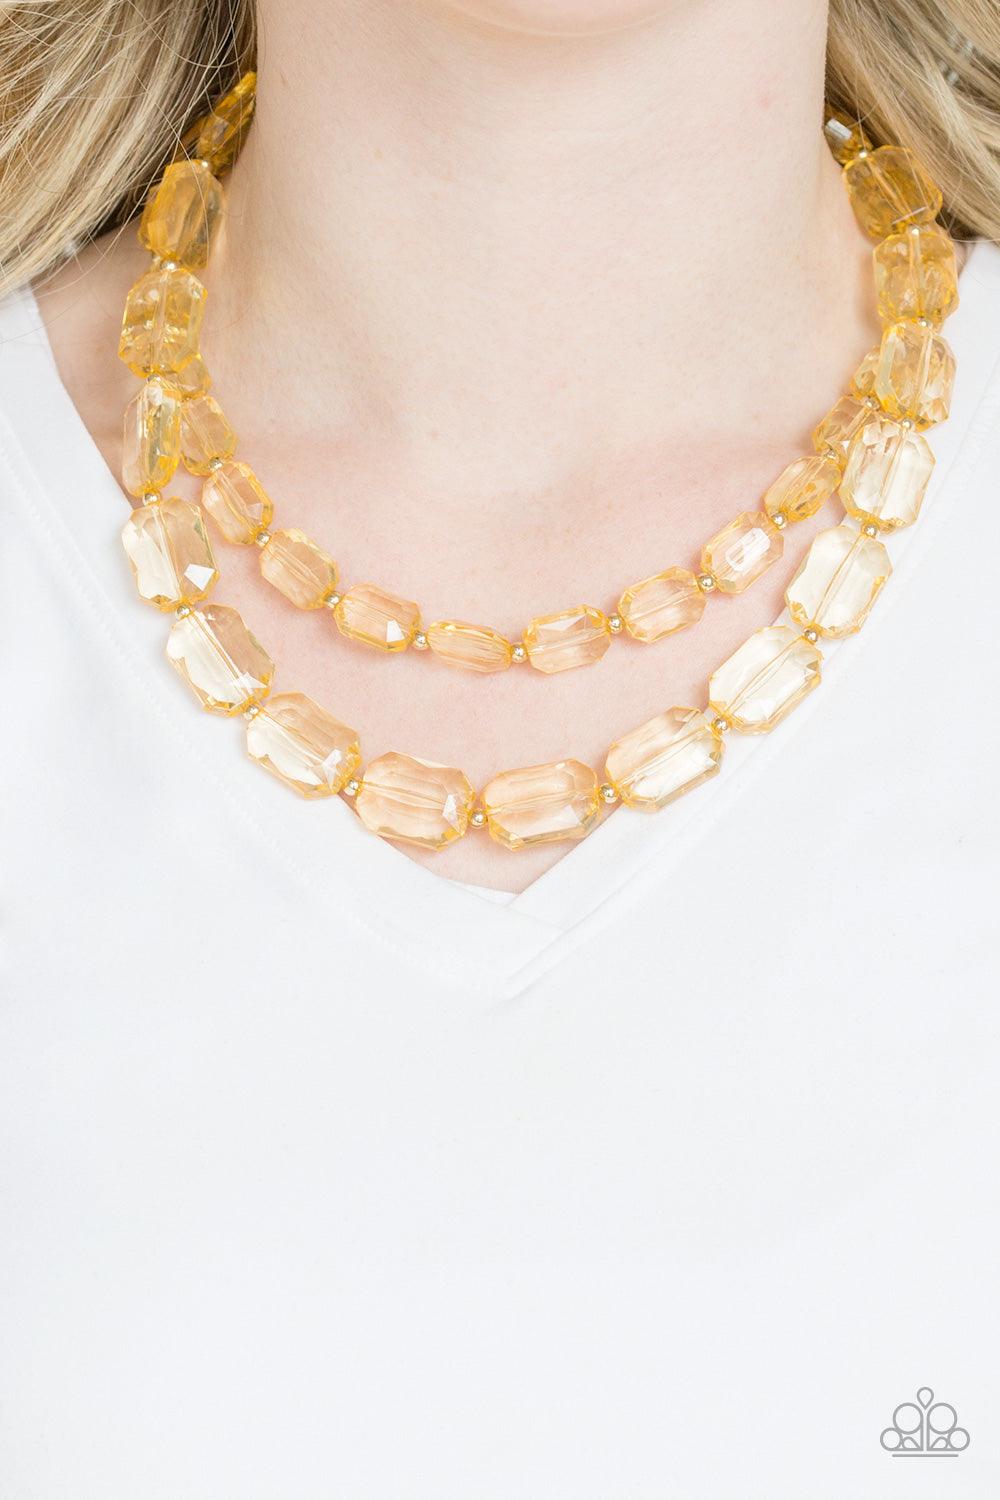 Paparazzi Accessories - Ice Bank - Gold Necklace - jewelrybybretta